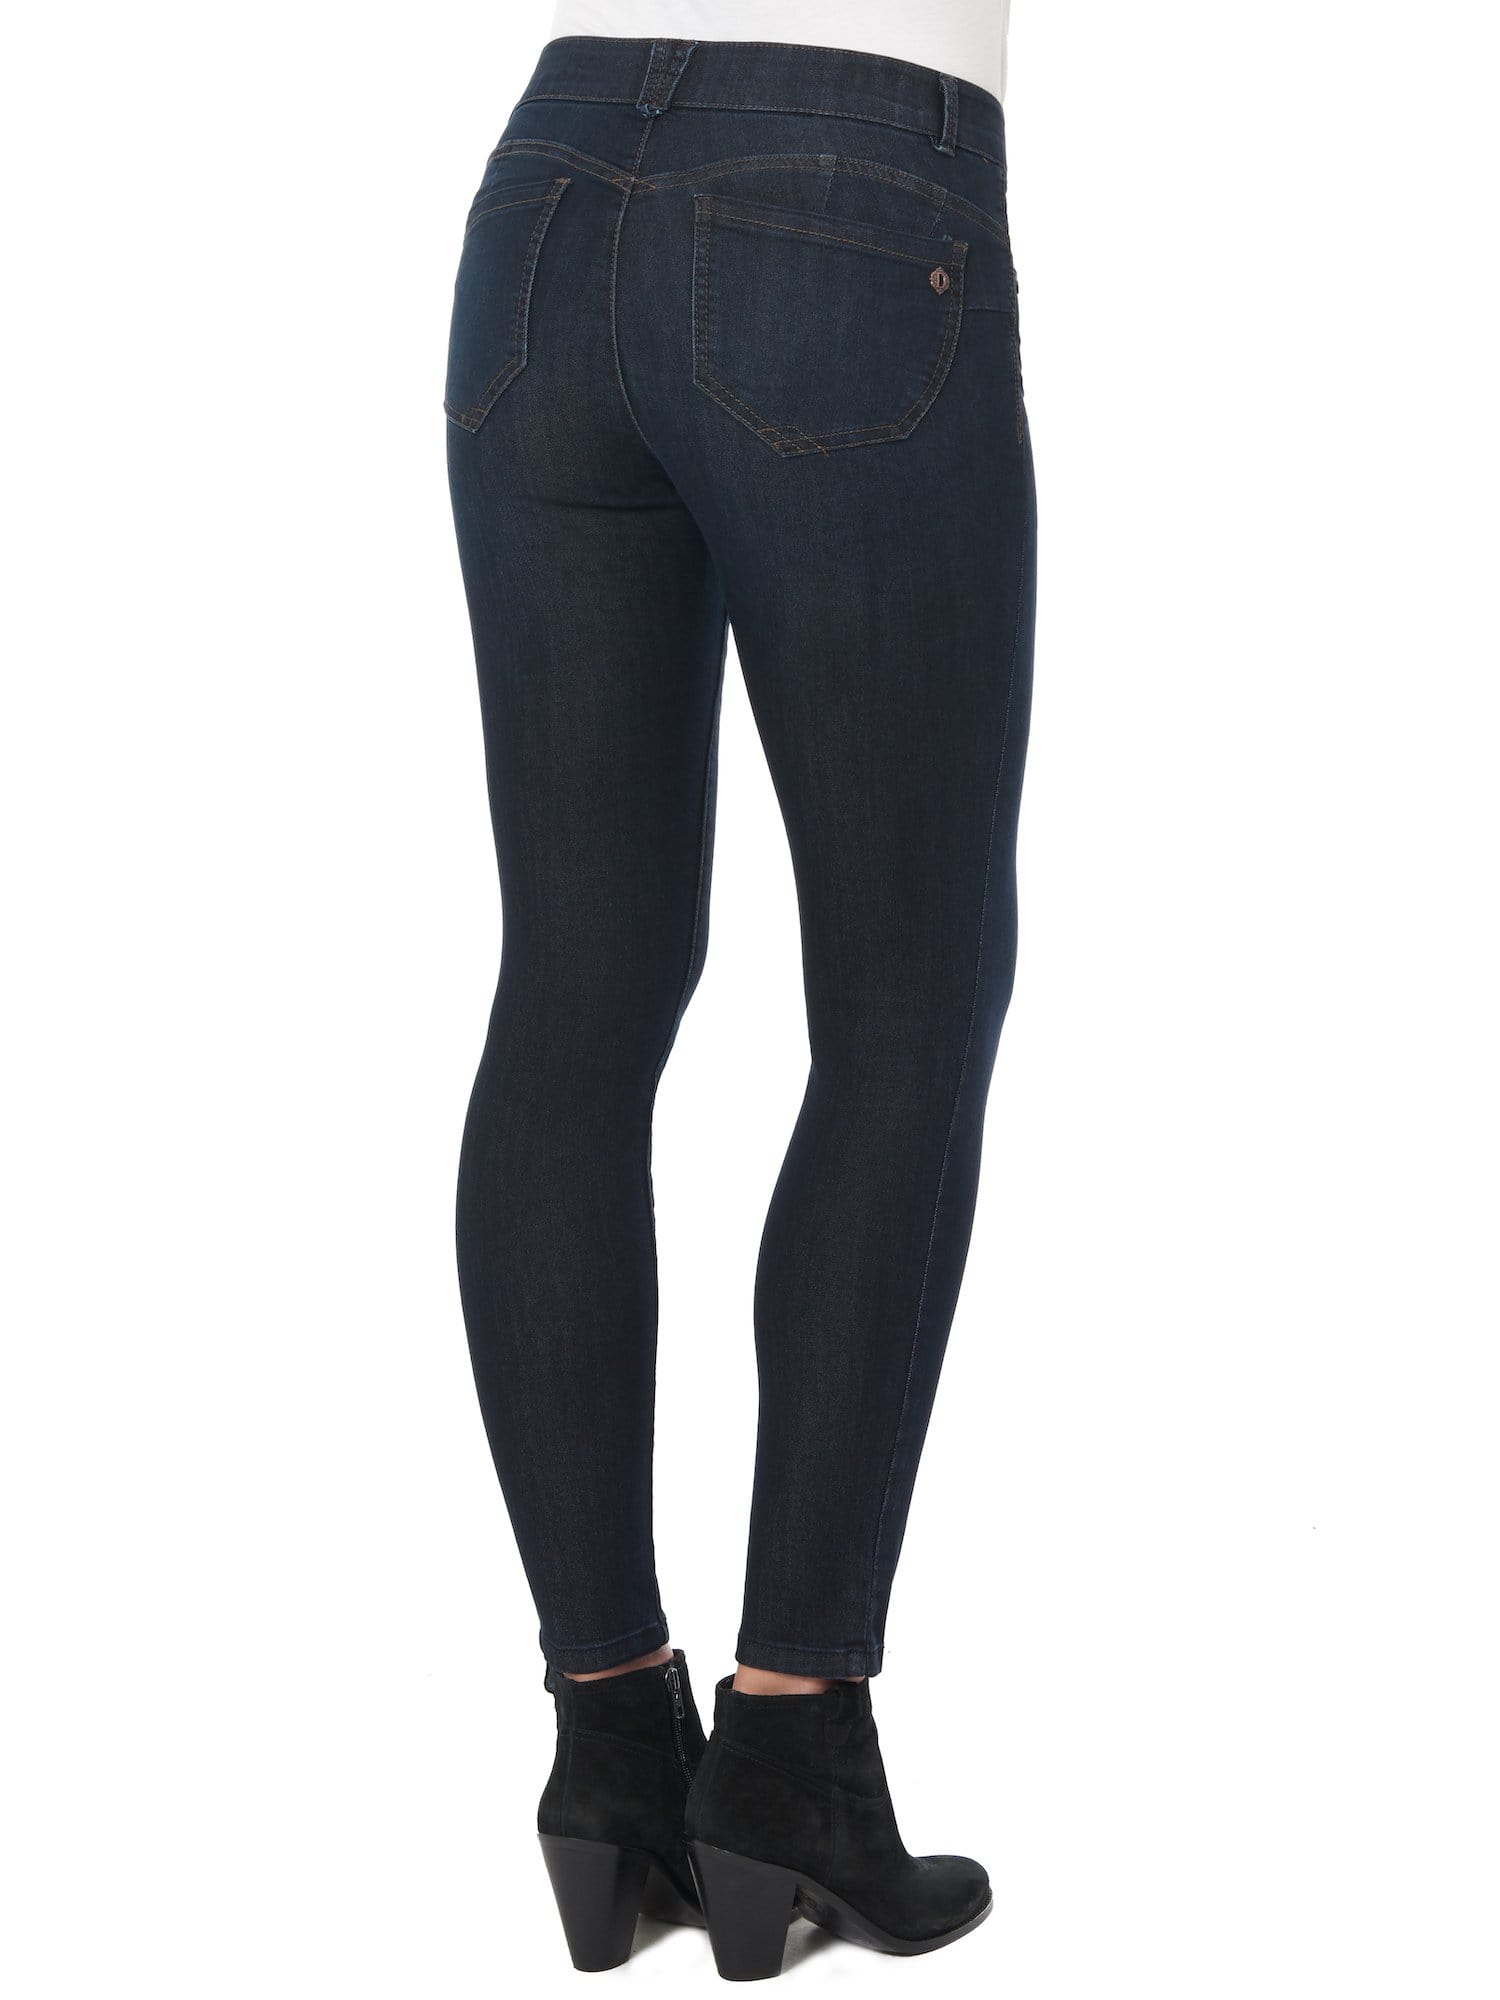 LICTZNEE Jeans for Womens, Skinny Denim Stretchy Ankle Jeggings Butt  Lifting Pants with Pockets